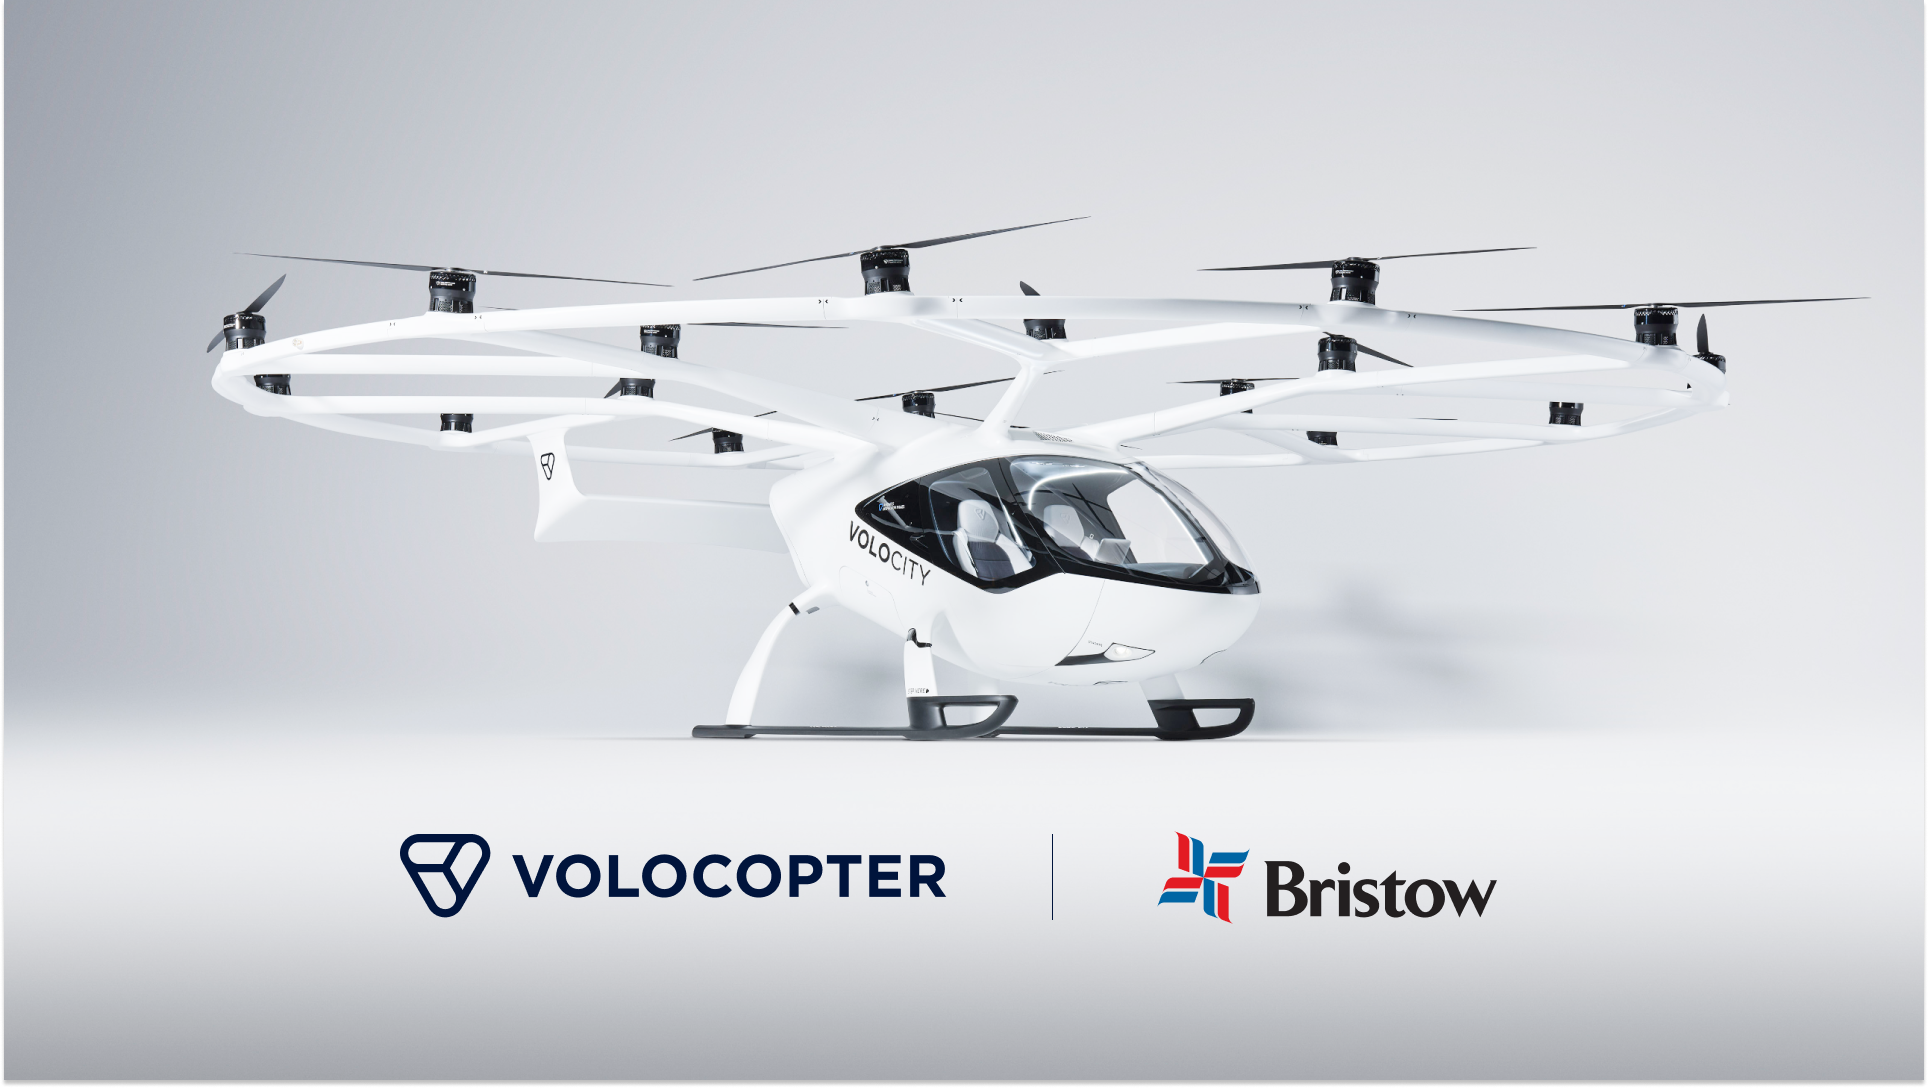 Bristow to Bring Volocopter Air Taxis to U.S. Via New Partnership